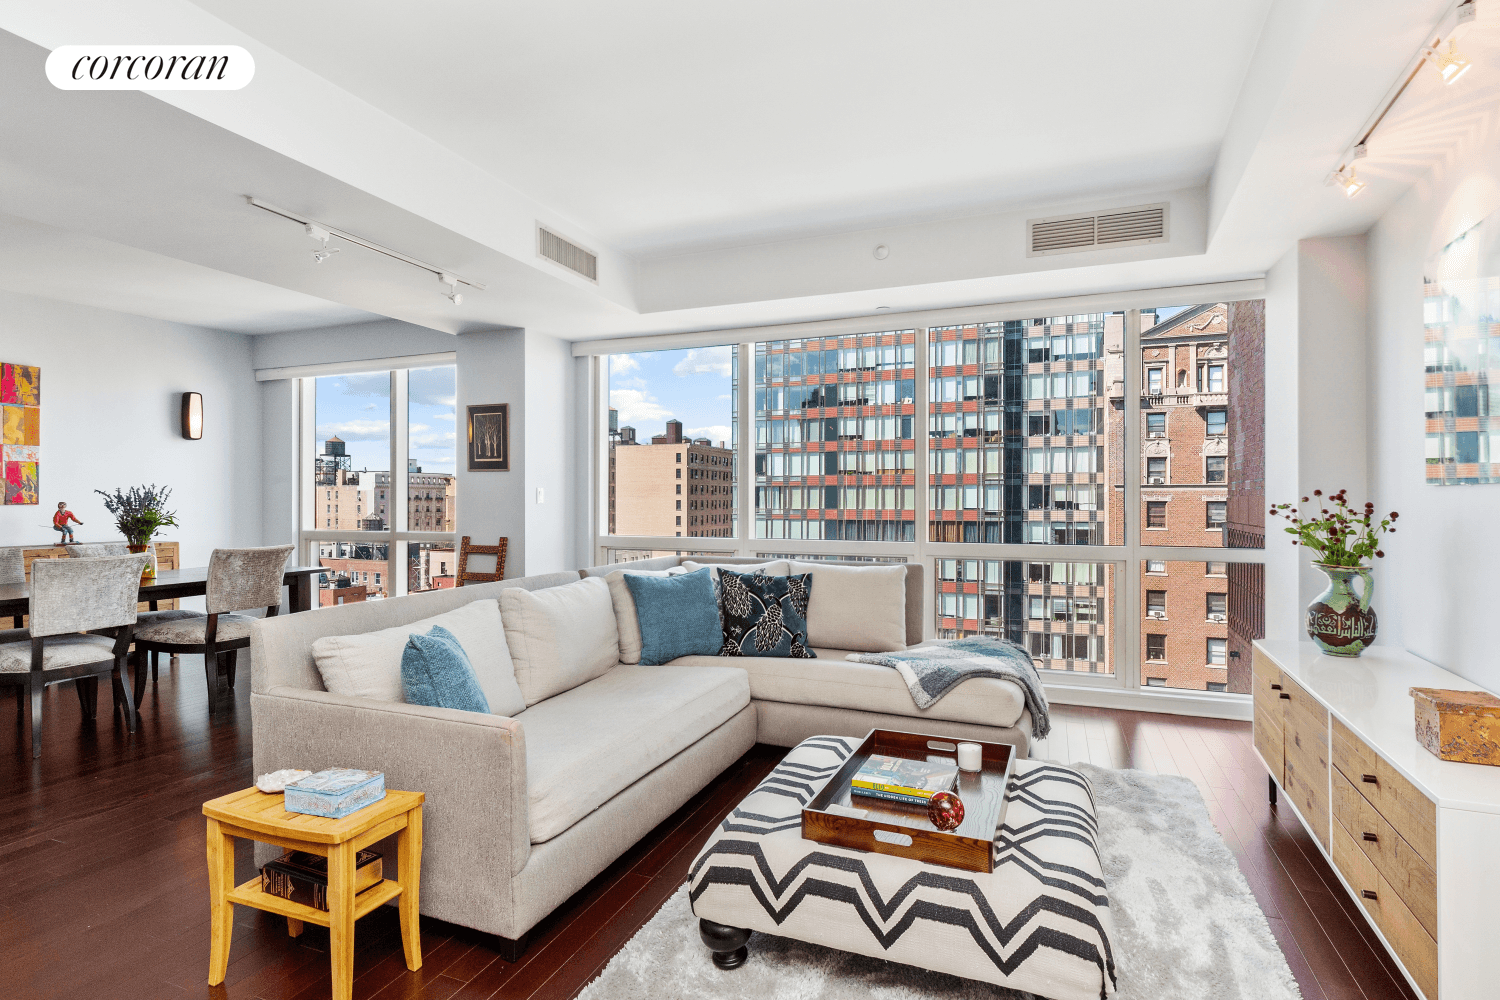 This incredibly spacious Upper West Side three bedroom, three bathroom condominium features a dedicated home office or fourth bedroom, central air conditioning, washer dryer and a private storage unit !